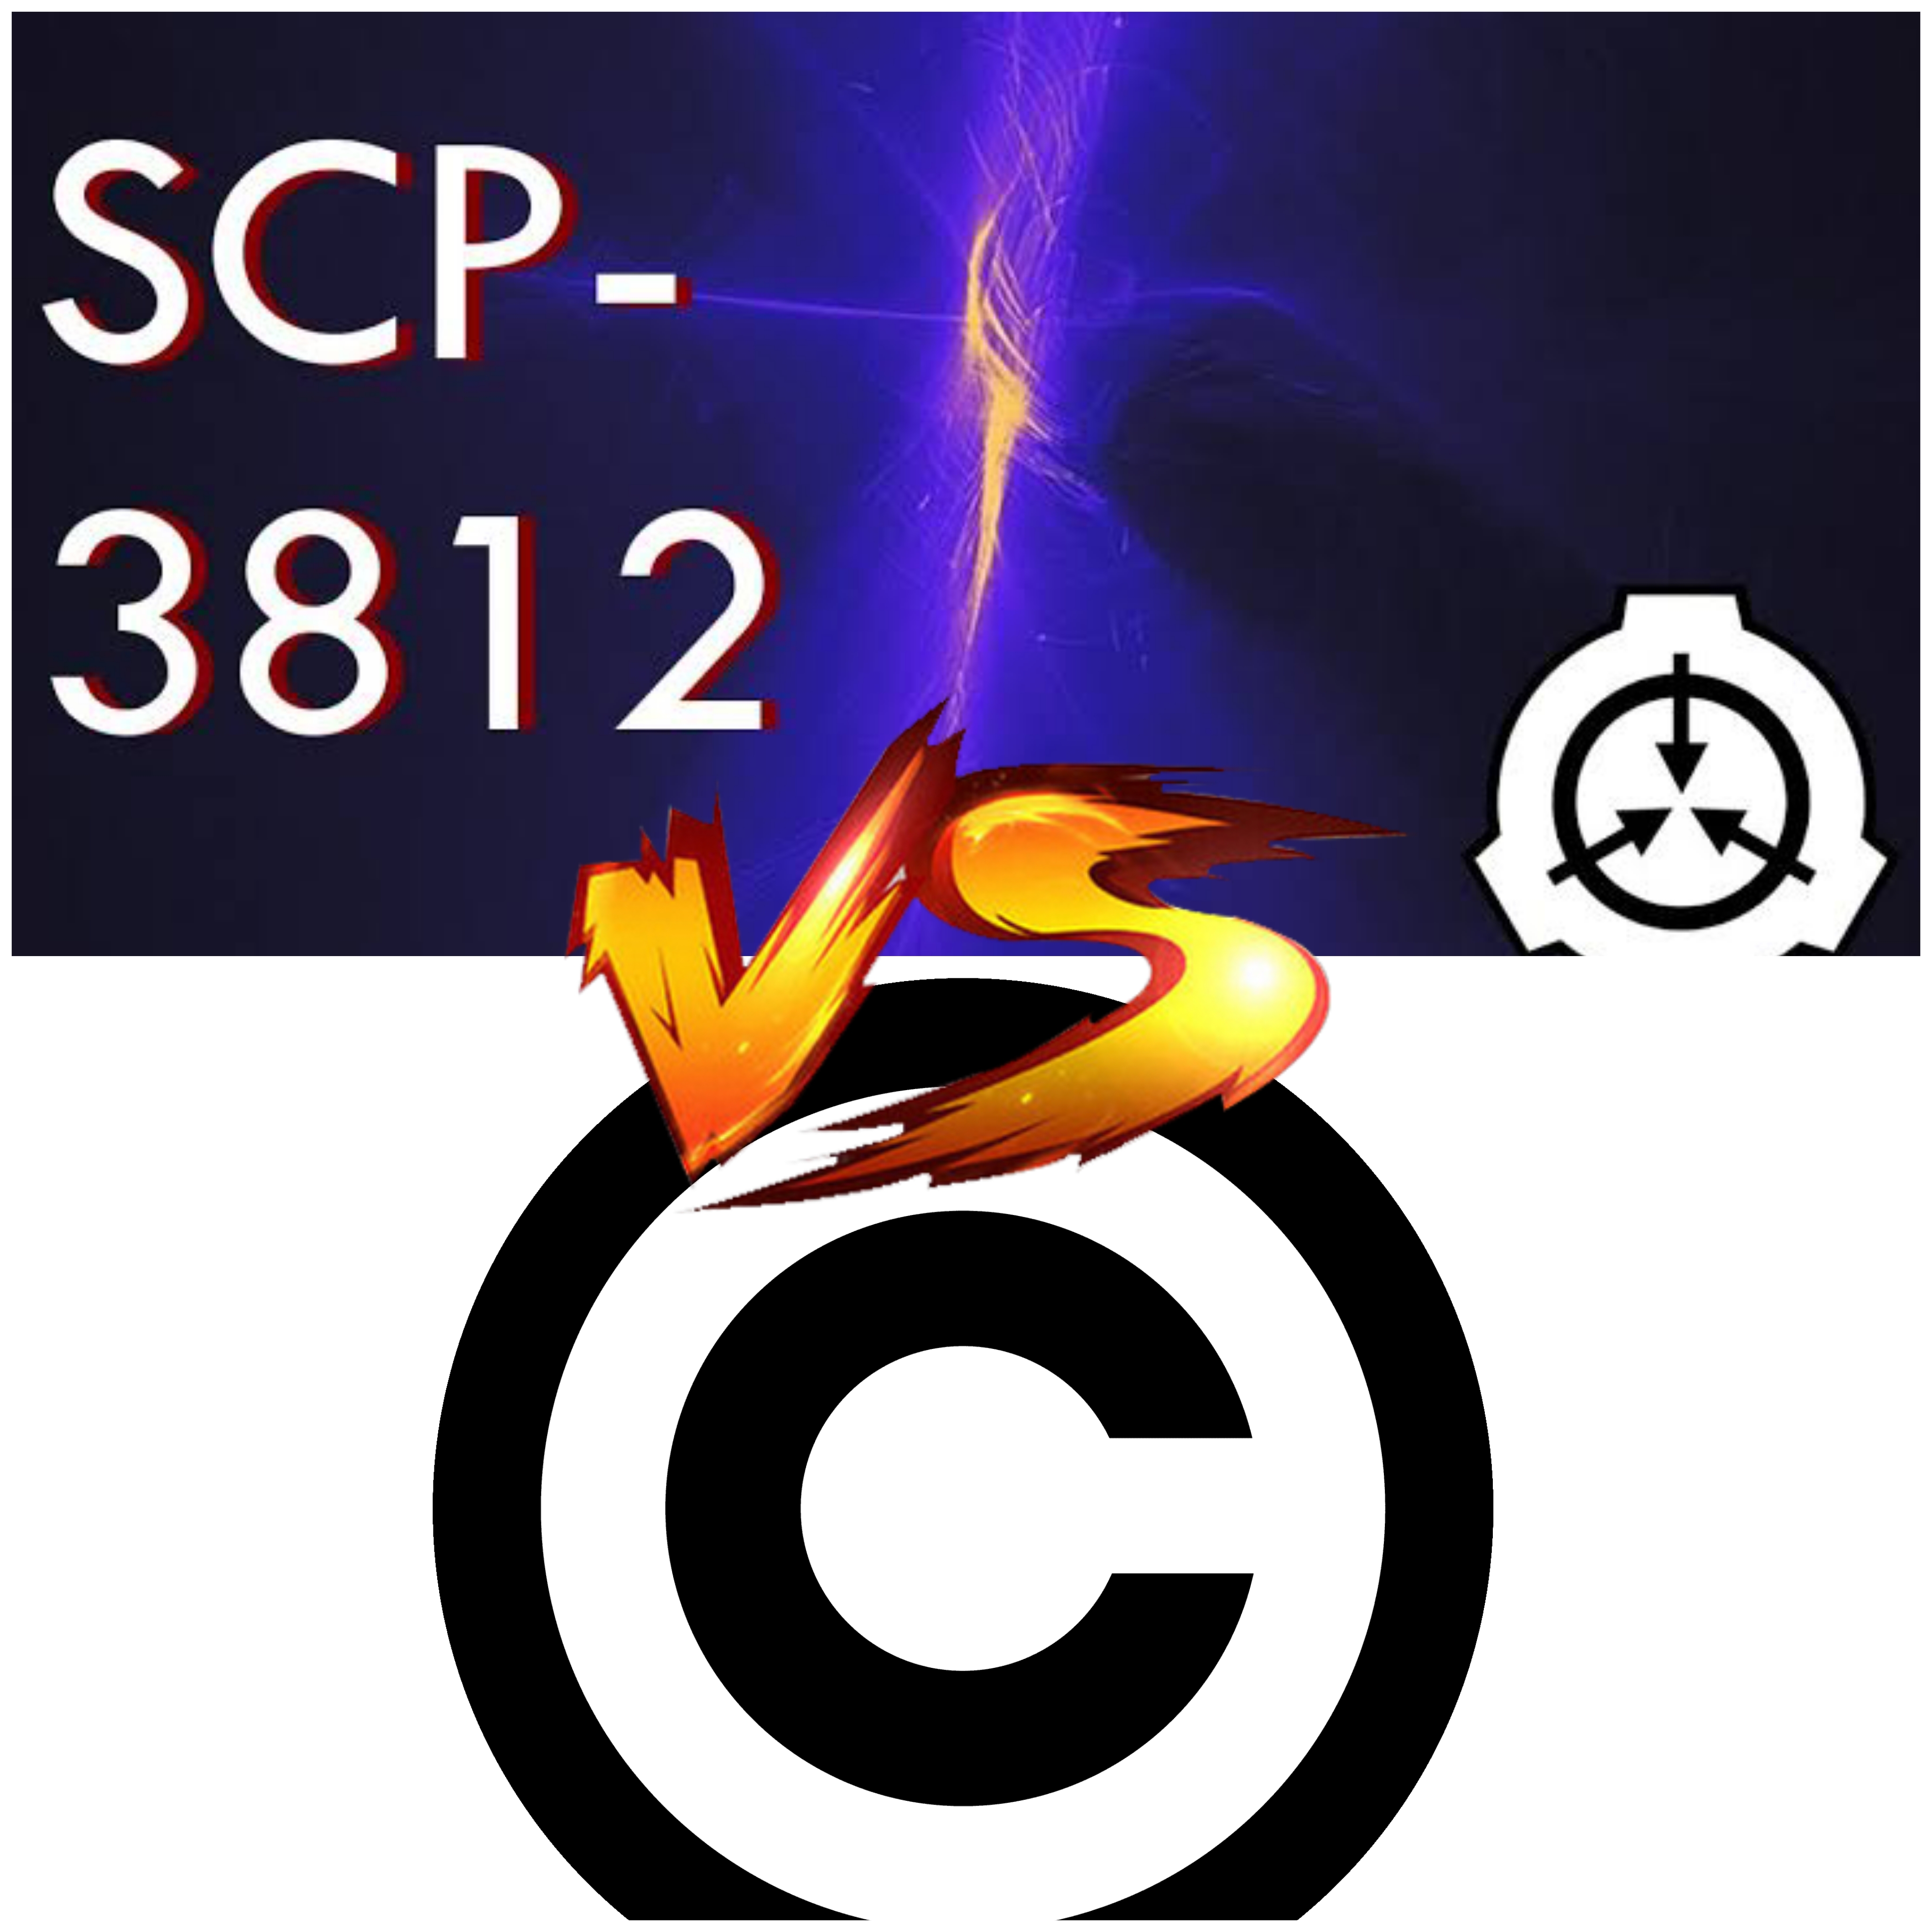 The infamous SCP 3812 indeed transcended fiction and even his